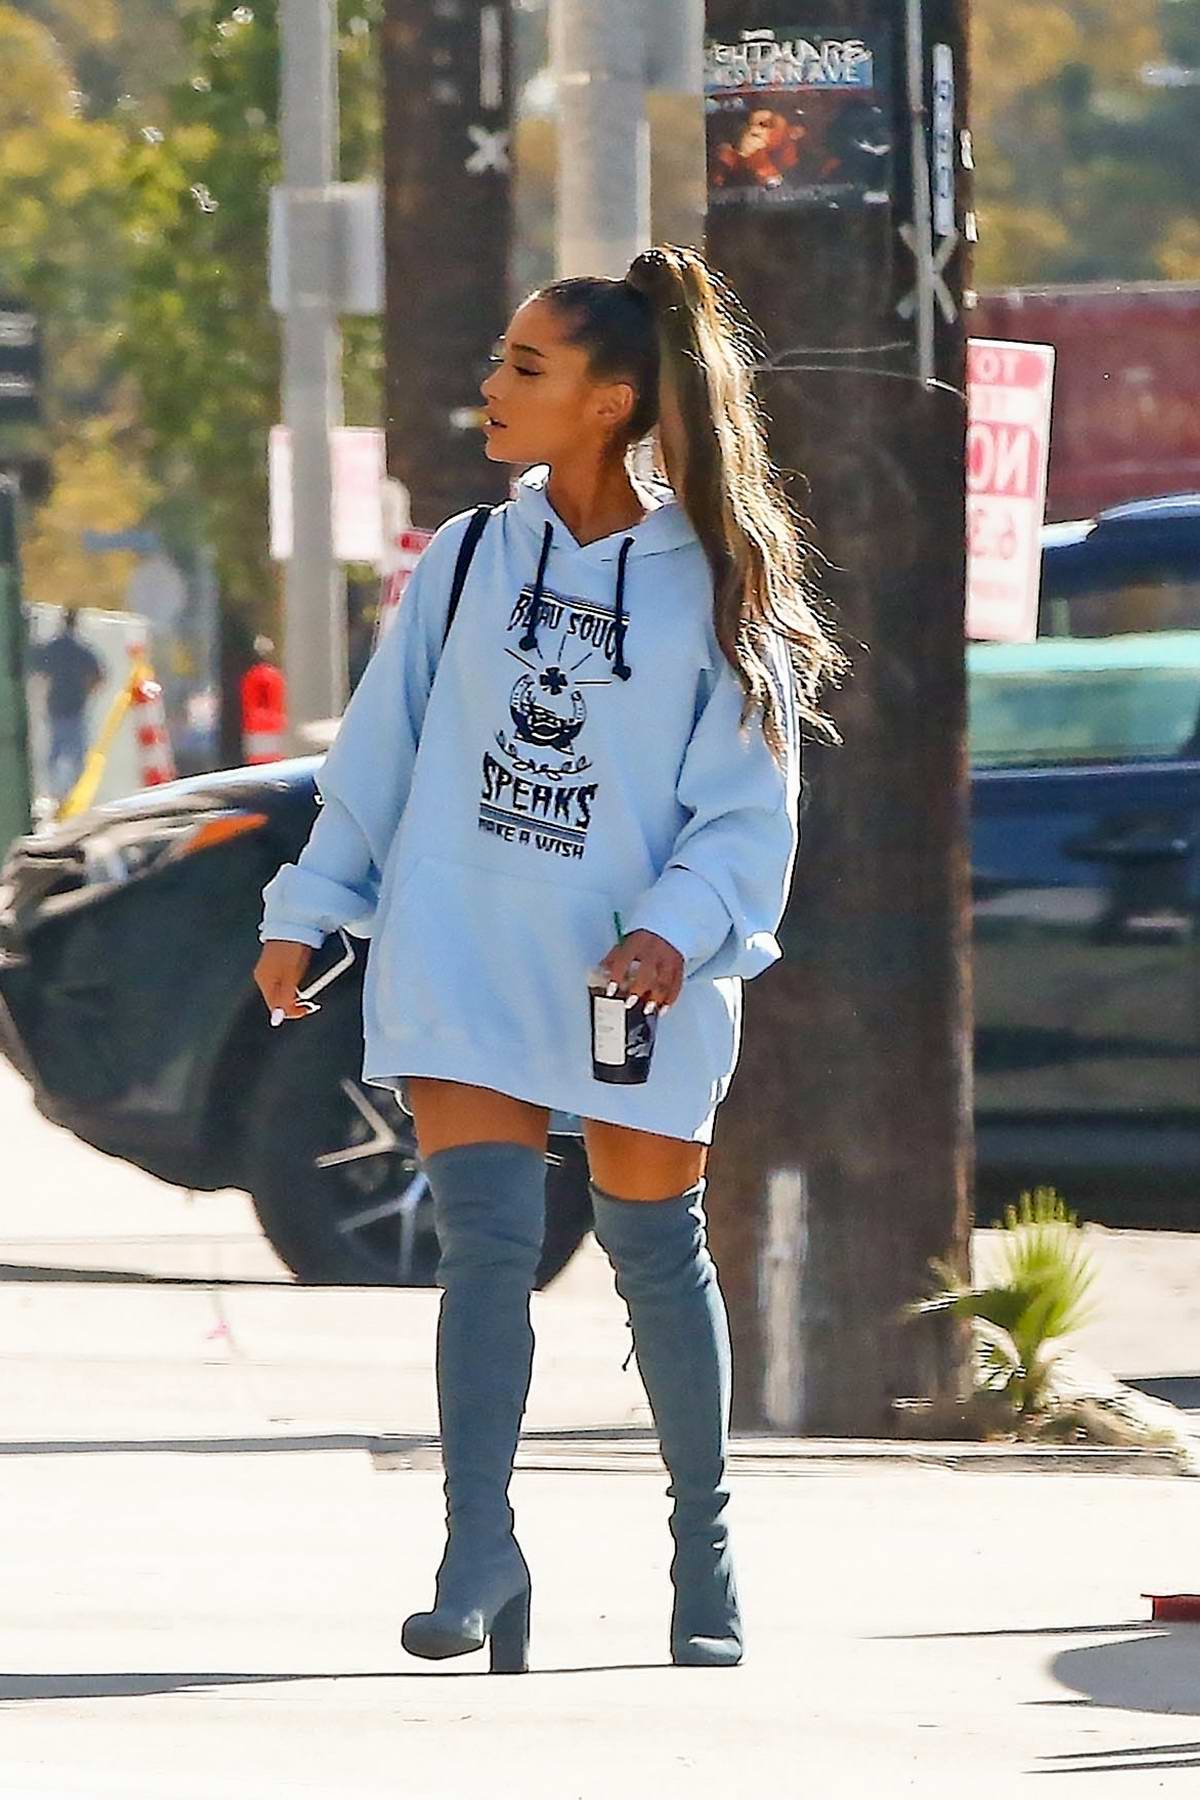 ariana grande wore a blue hoodie and knee high boots as she arrives at